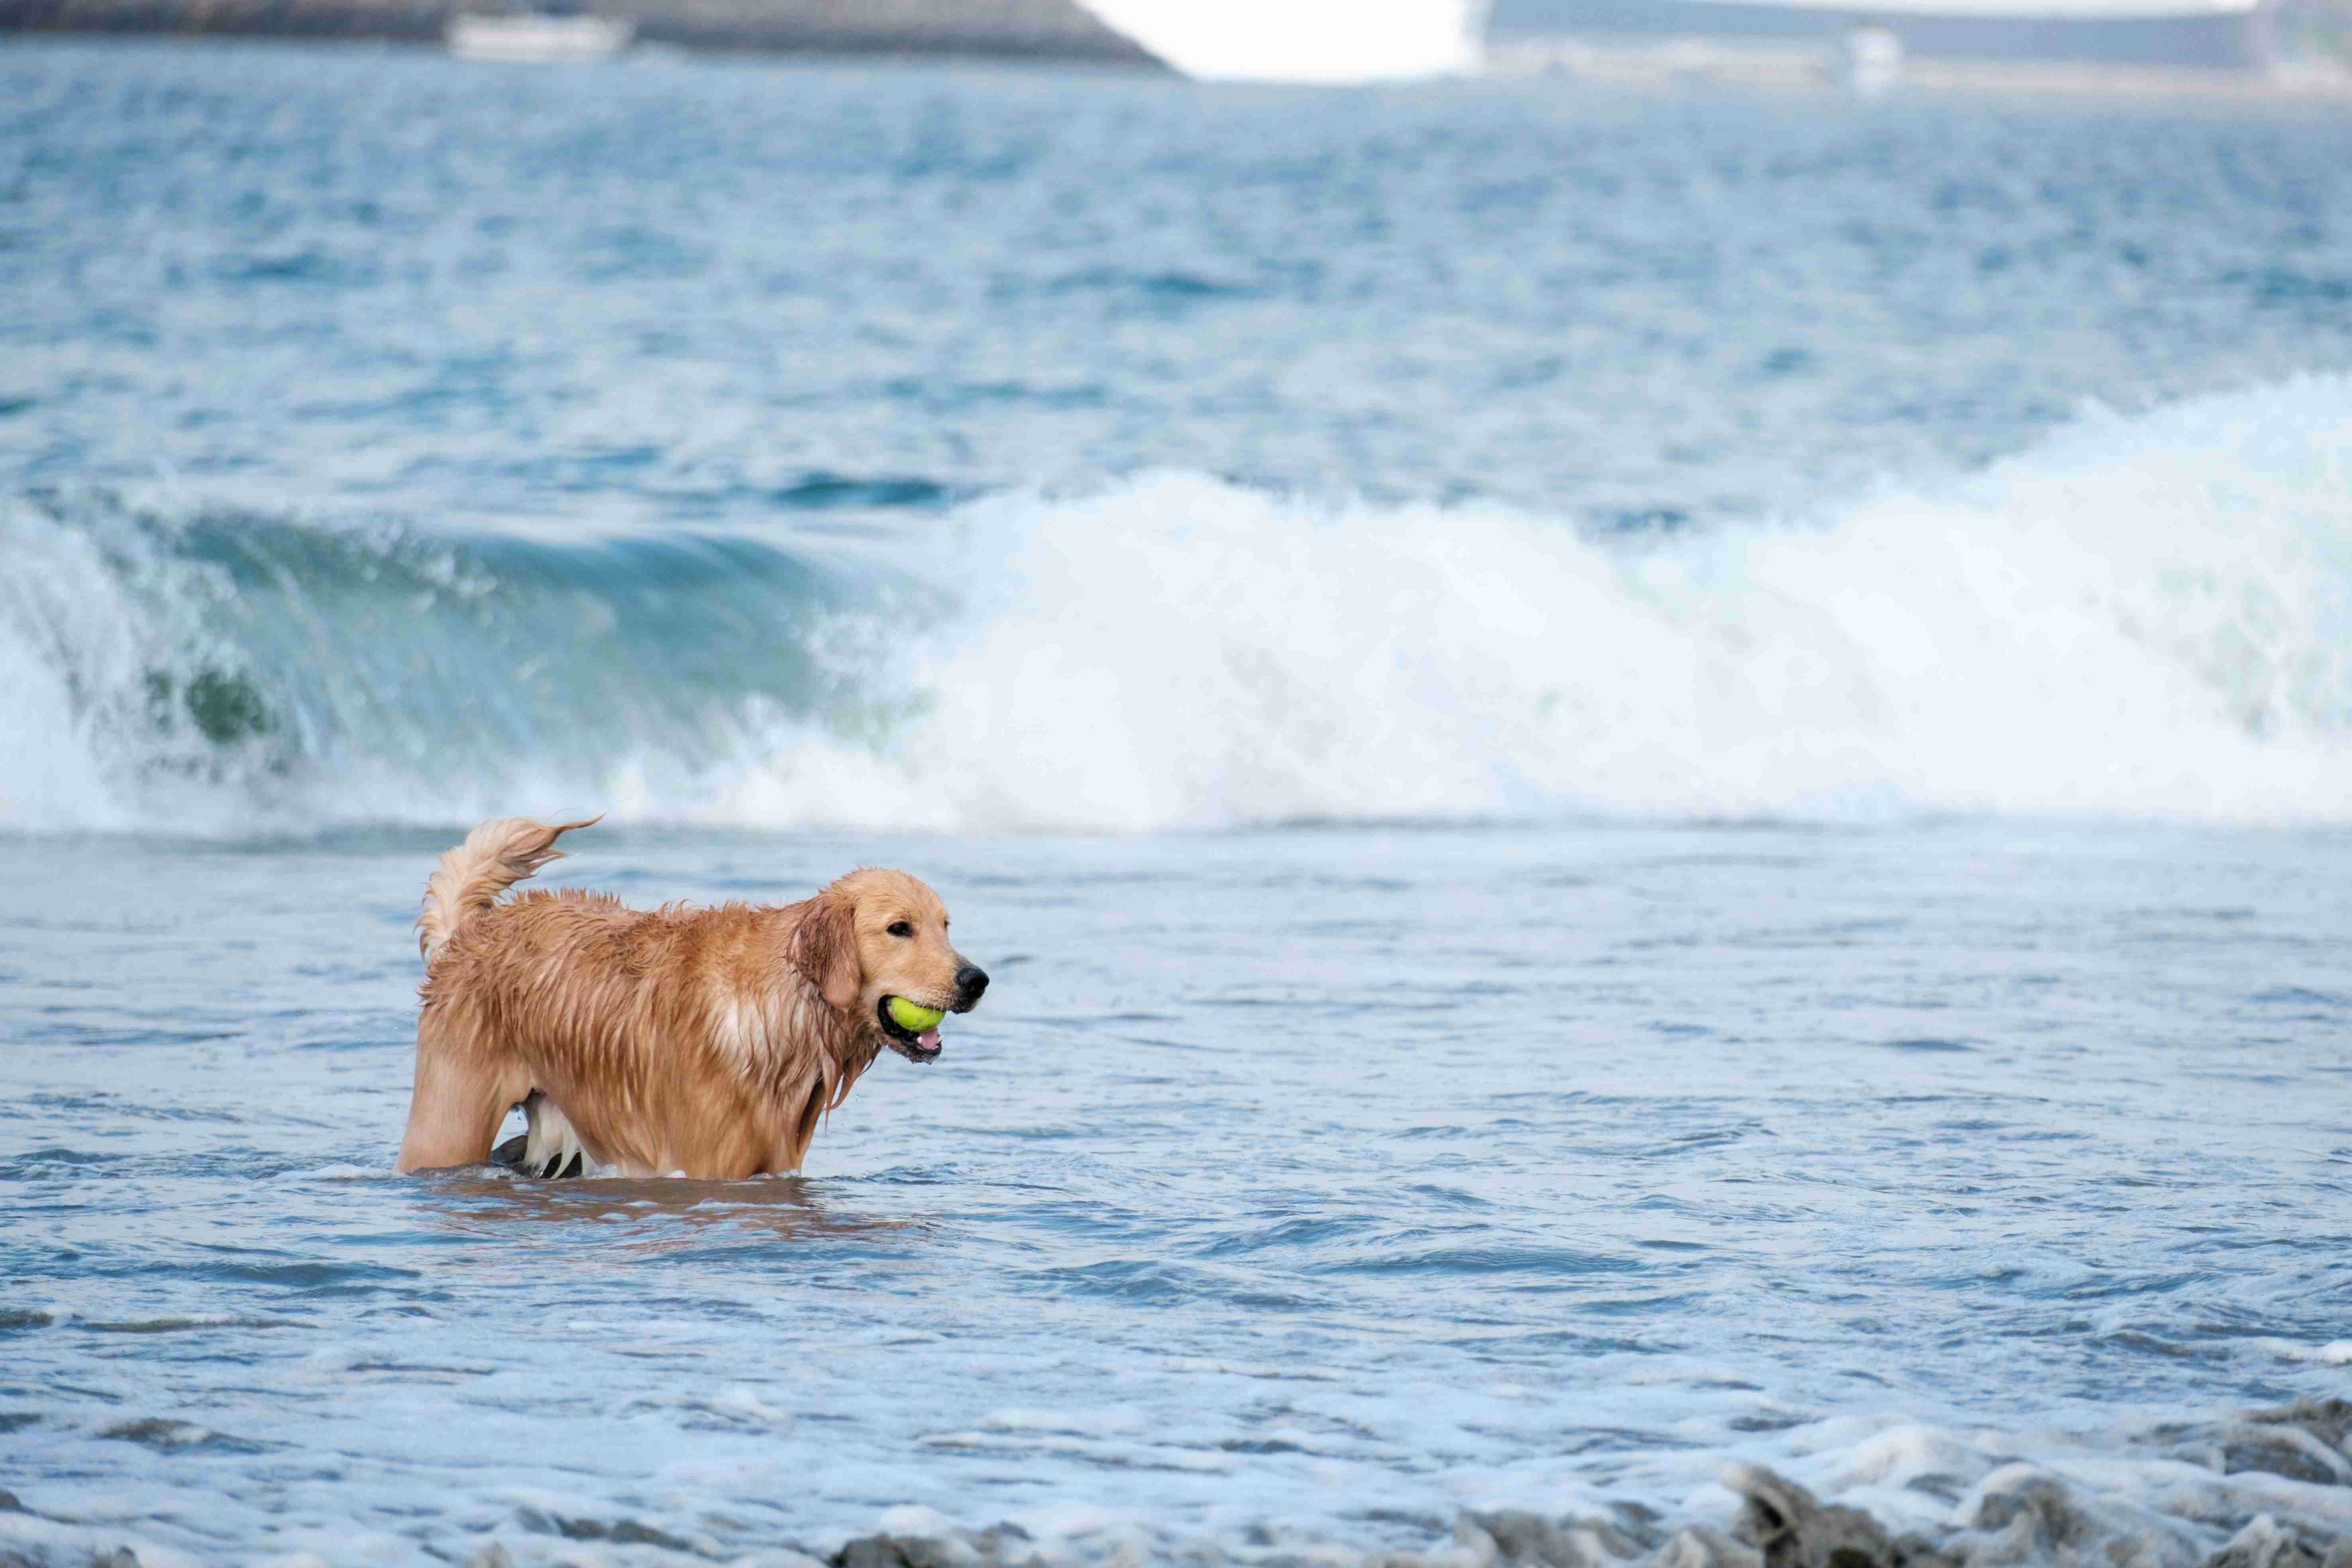 Are there any specific exercises or activities that are beneficial for a Golden Retriever's mental stimulation?